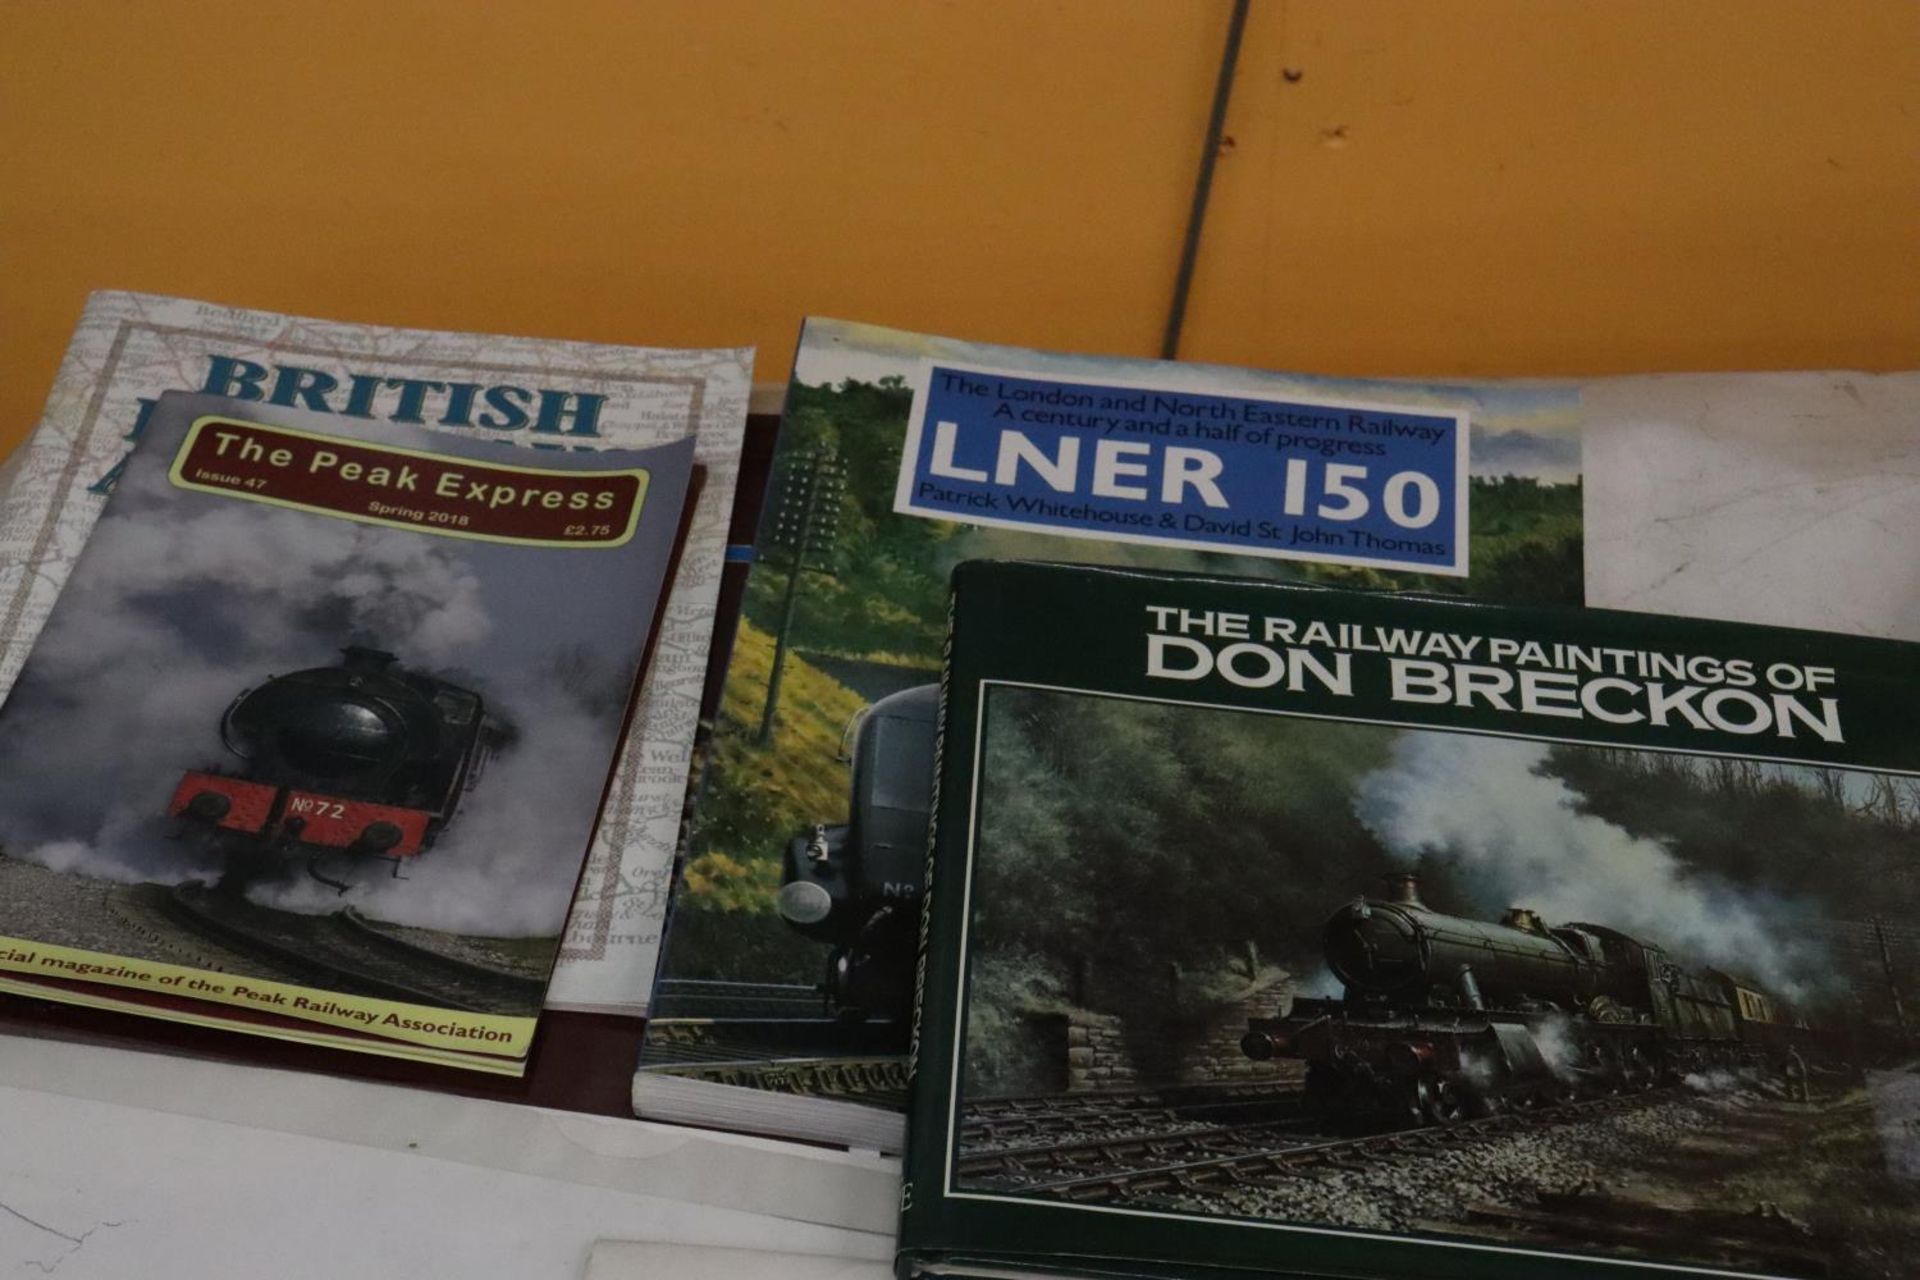 A COLLECTION OF RAILWAY RELATED ITEMS, PRINTS, BOOKS ETC - Image 4 of 4